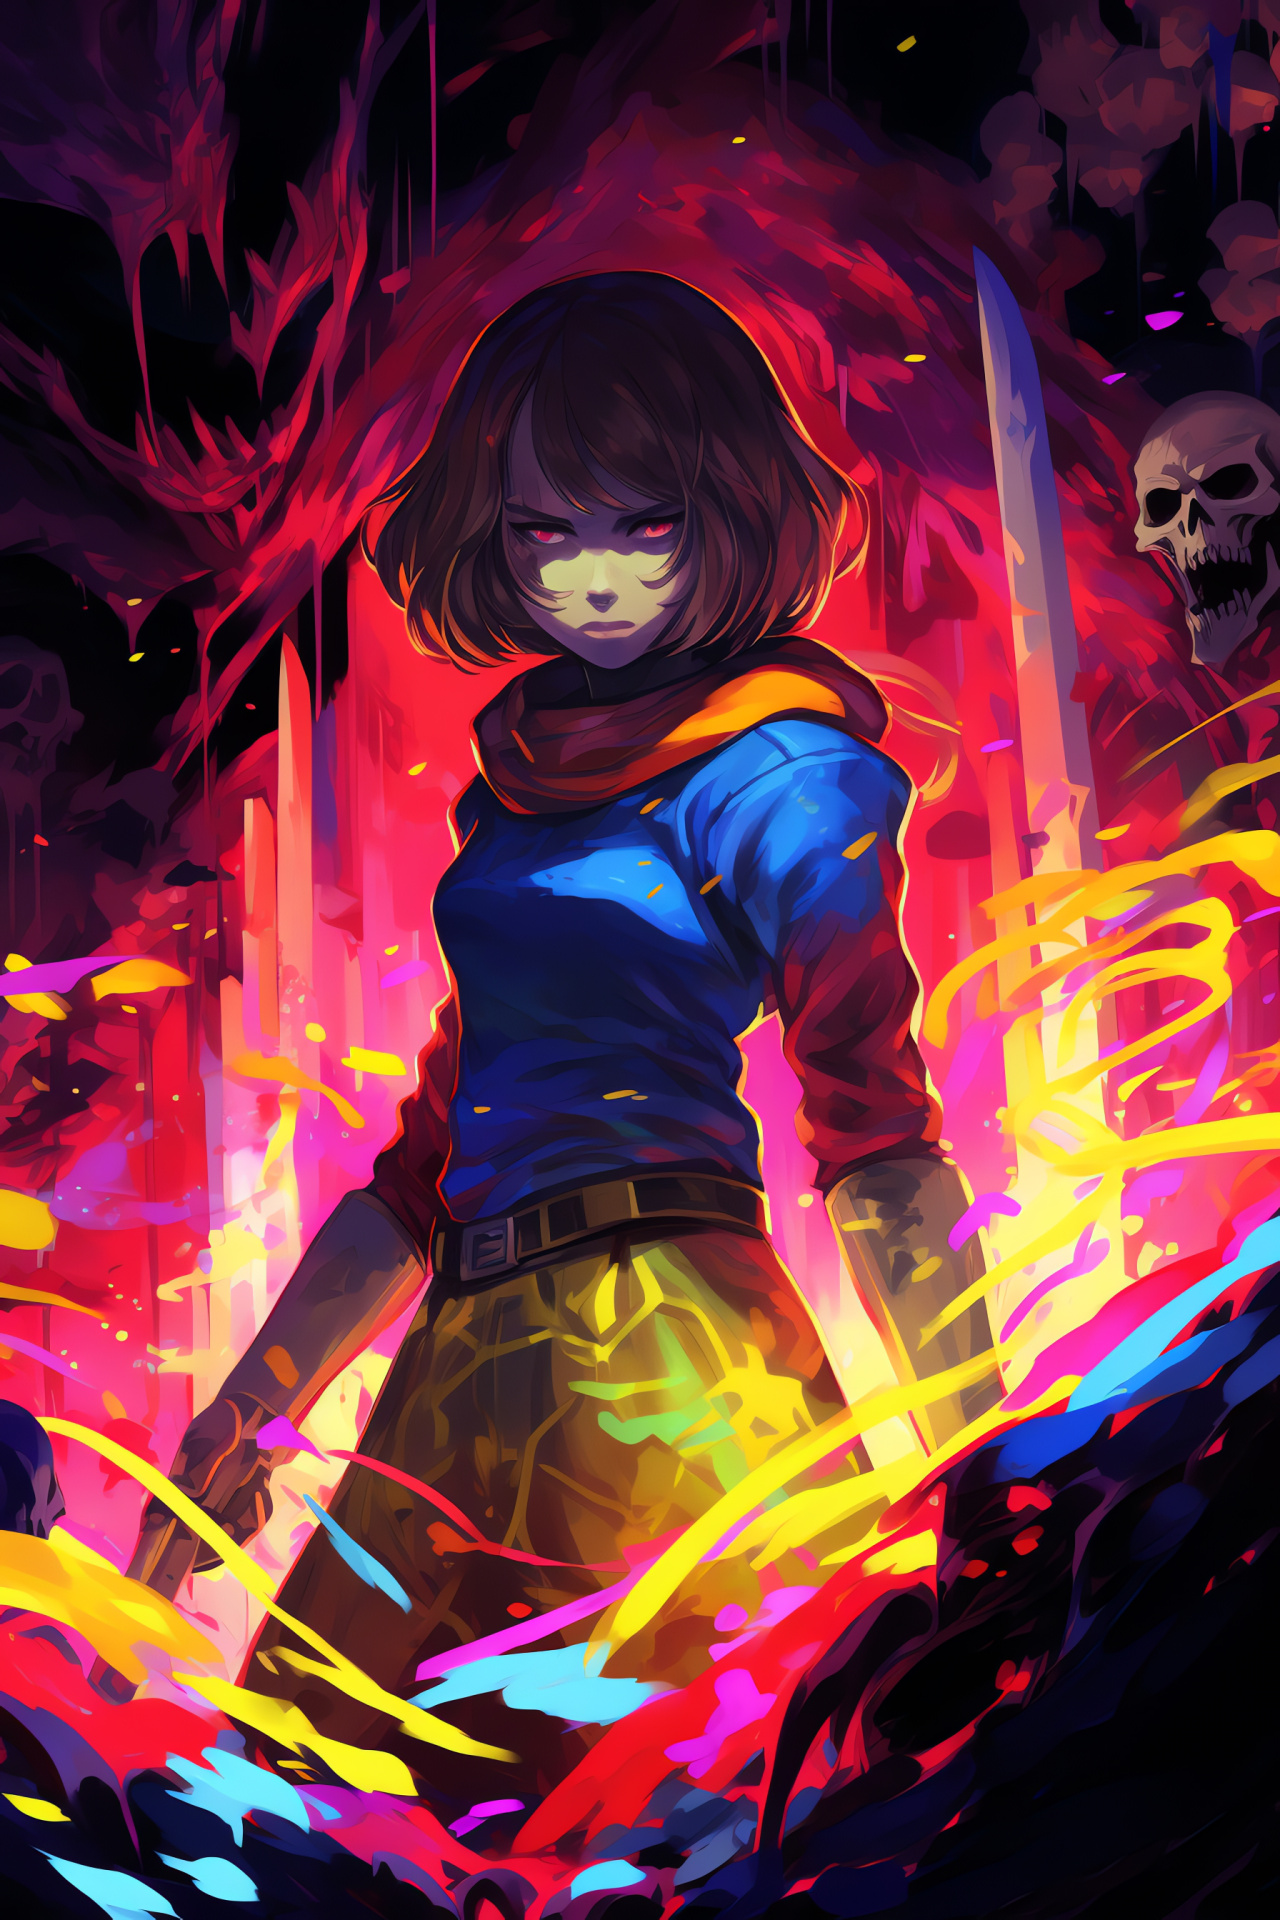 Gaming journey Frisk, Skirmish with Papyrus, Guarded arena, Gaming saga, Interactive challenge, HD Phone Wallpaper